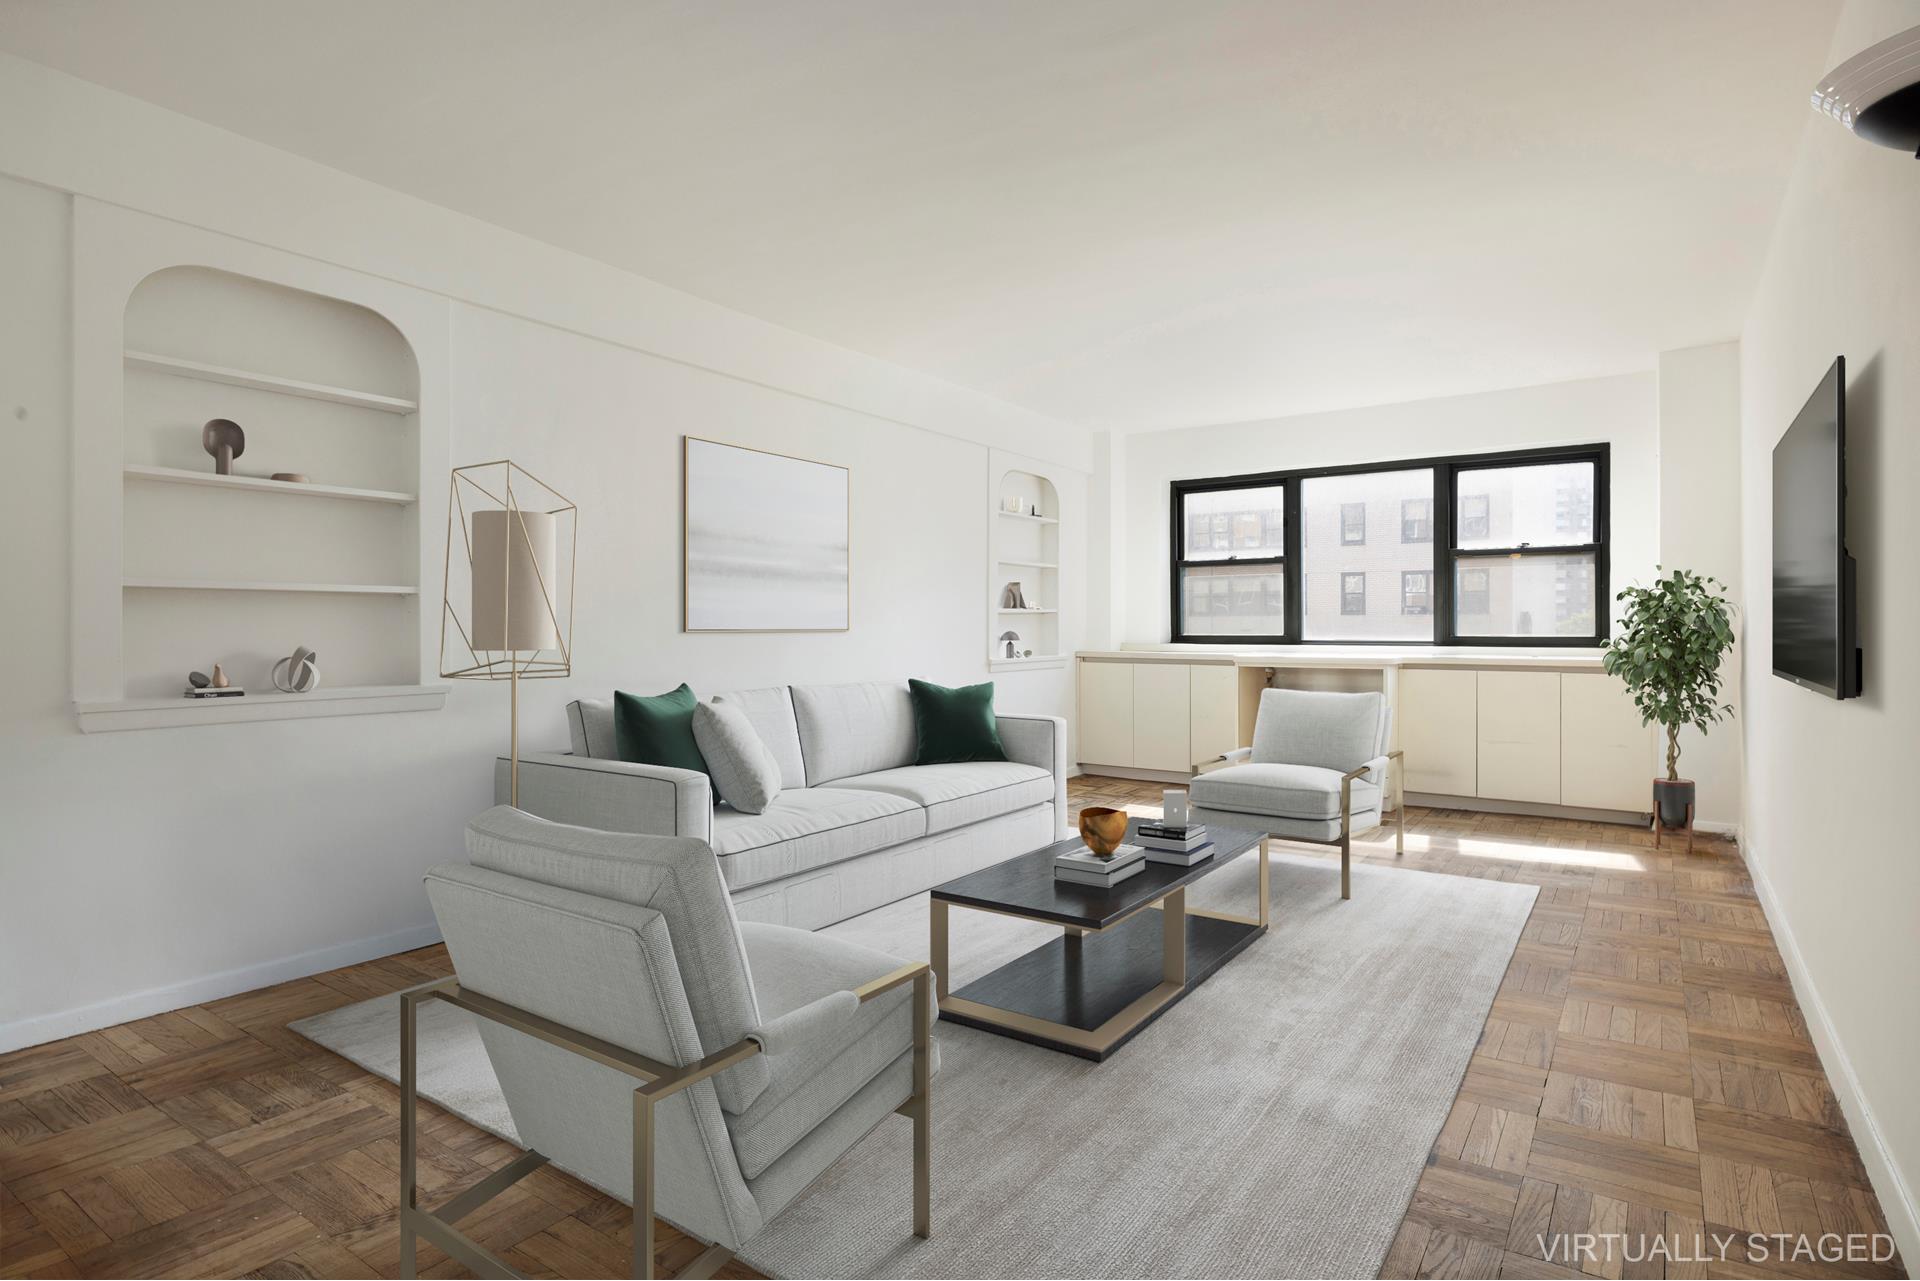 181 East 73rd Street 8A, Lenox Hill, Upper East Side, NYC - 2 Bedrooms  
2 Bathrooms  
5 Rooms - 